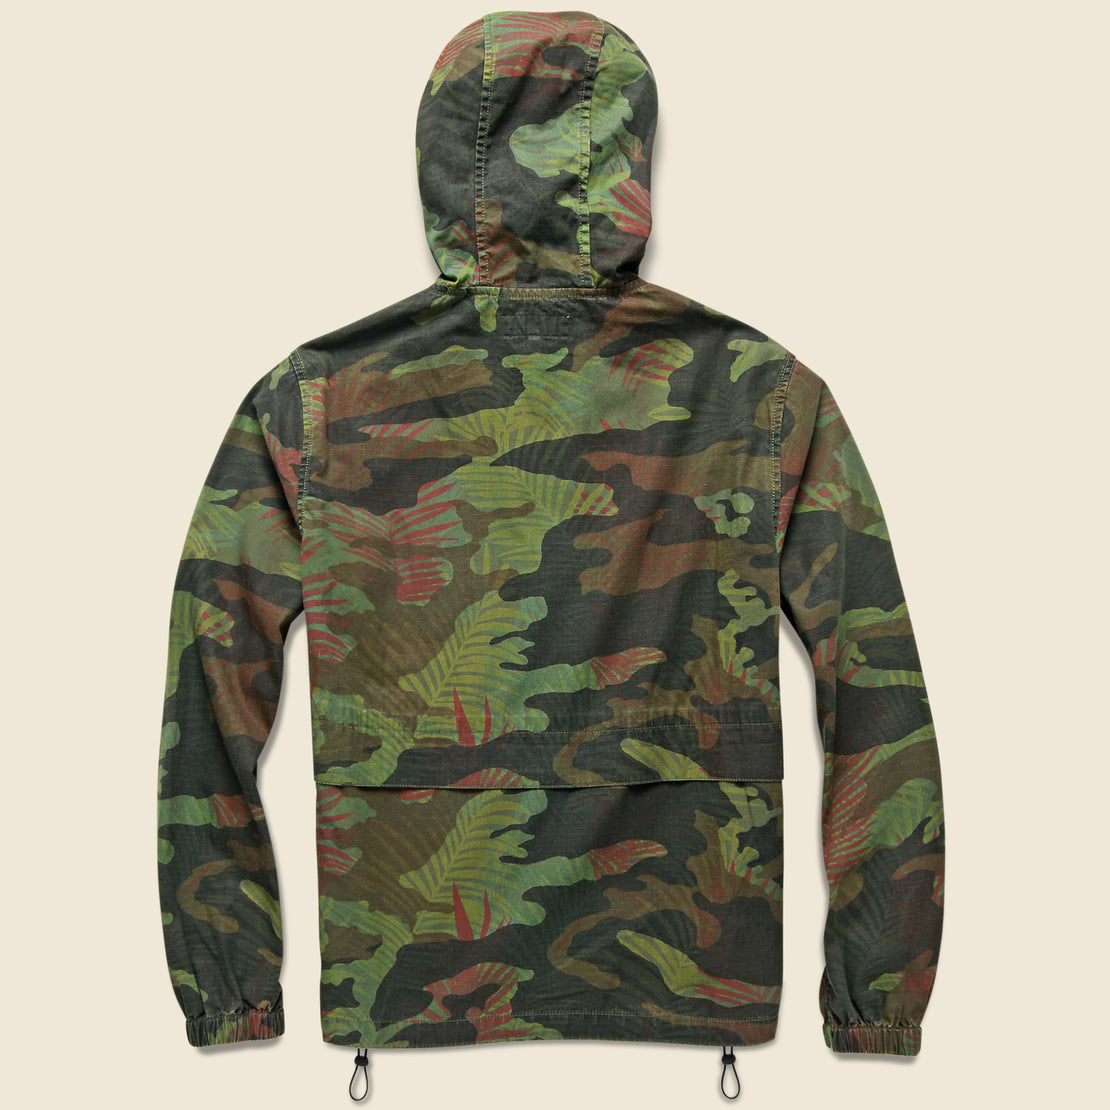 Hooded Jacket - Tropical Camo - Alex Mill - STAG Provisions - Outerwear - Coat / Jacket